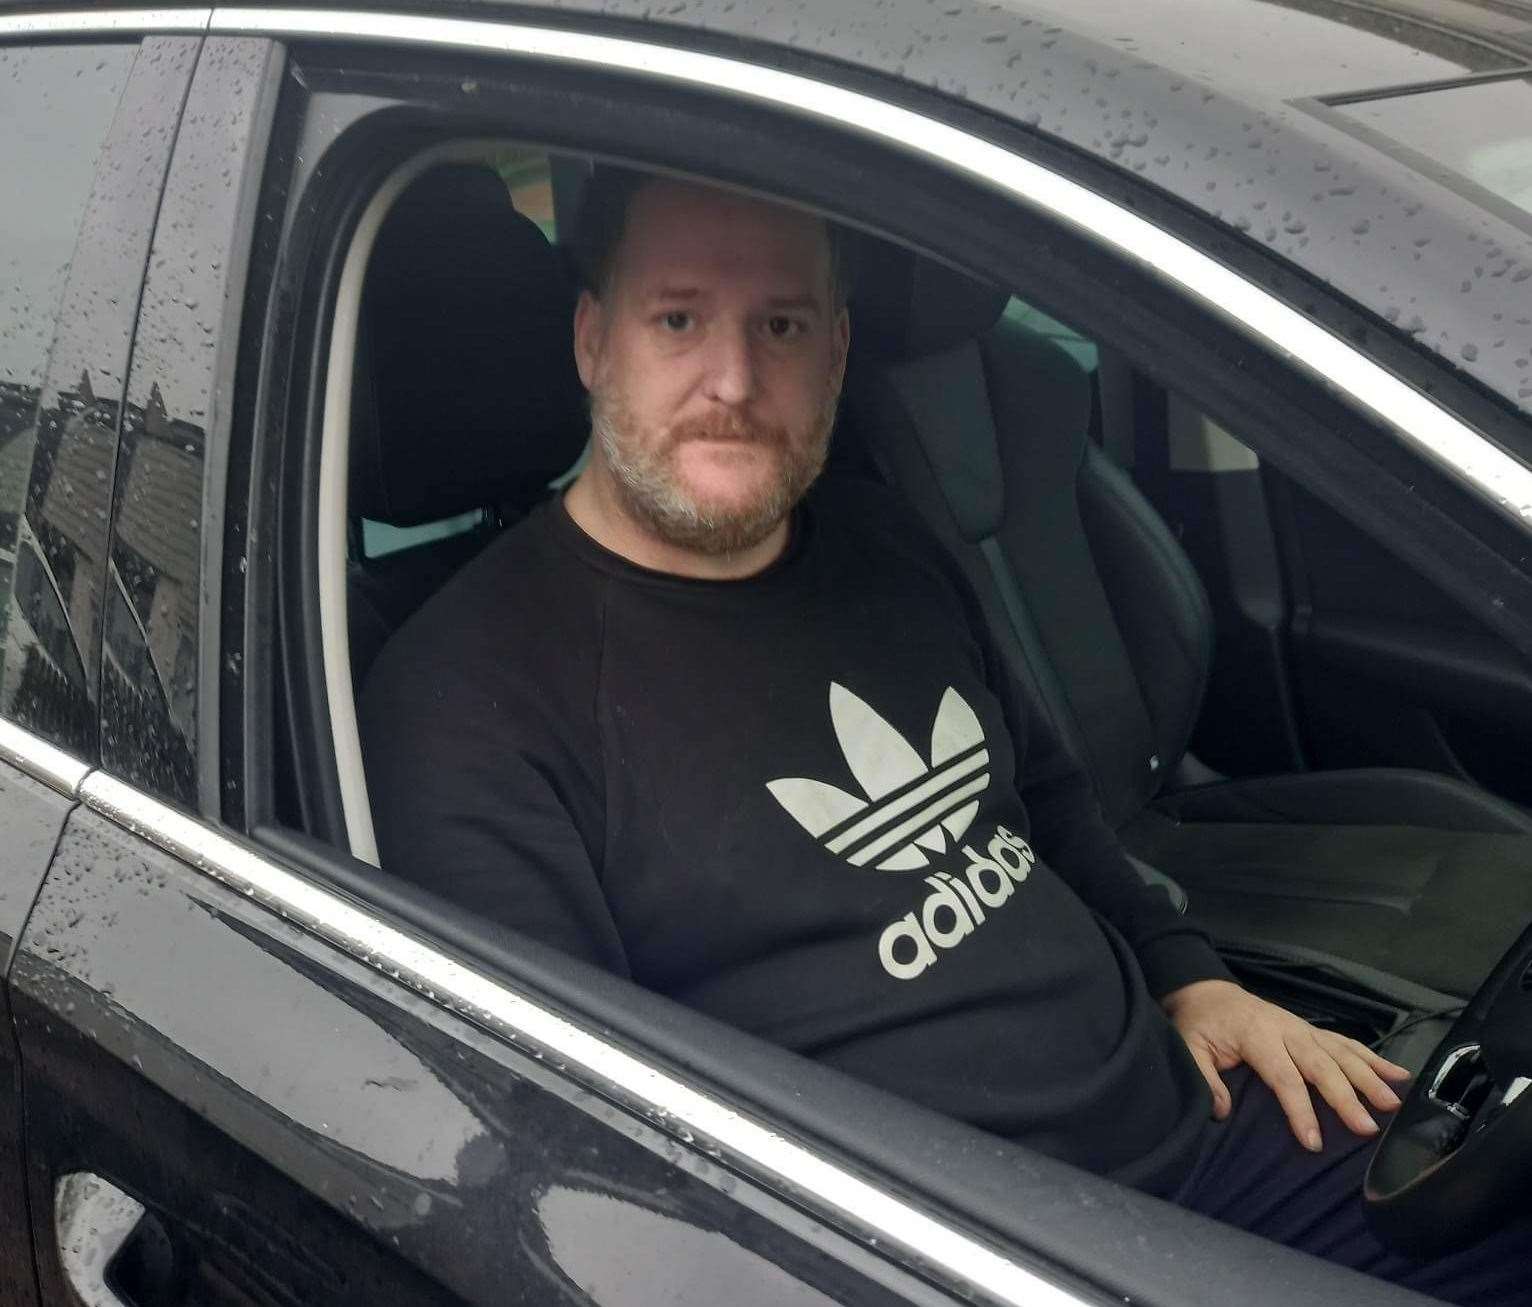 Robert Woodward has been living in his car for three months, after moving to Thanet